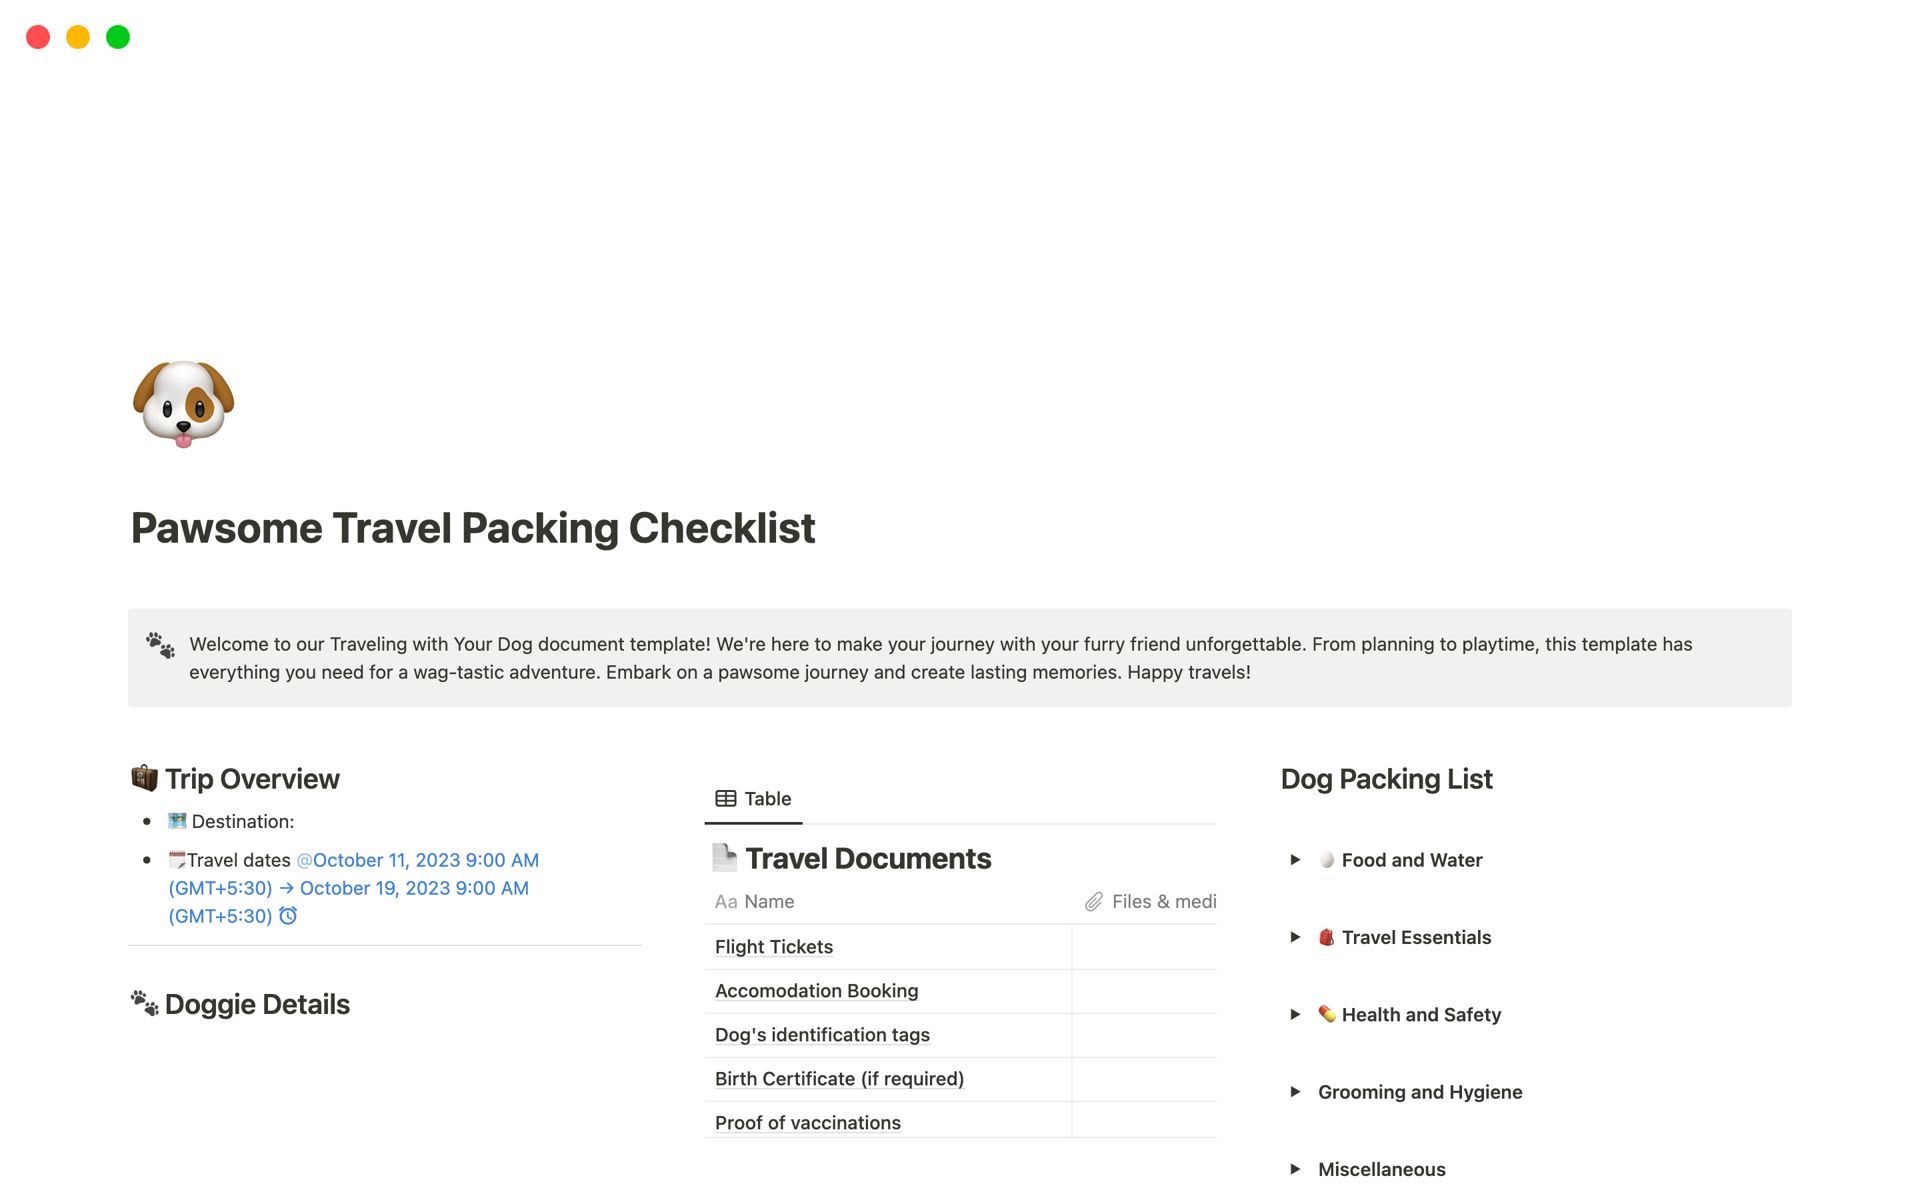 Introducing our Doggy Travel Packing Checklist– the ultimate companion for hassle-free adventures with your four-legged friend!